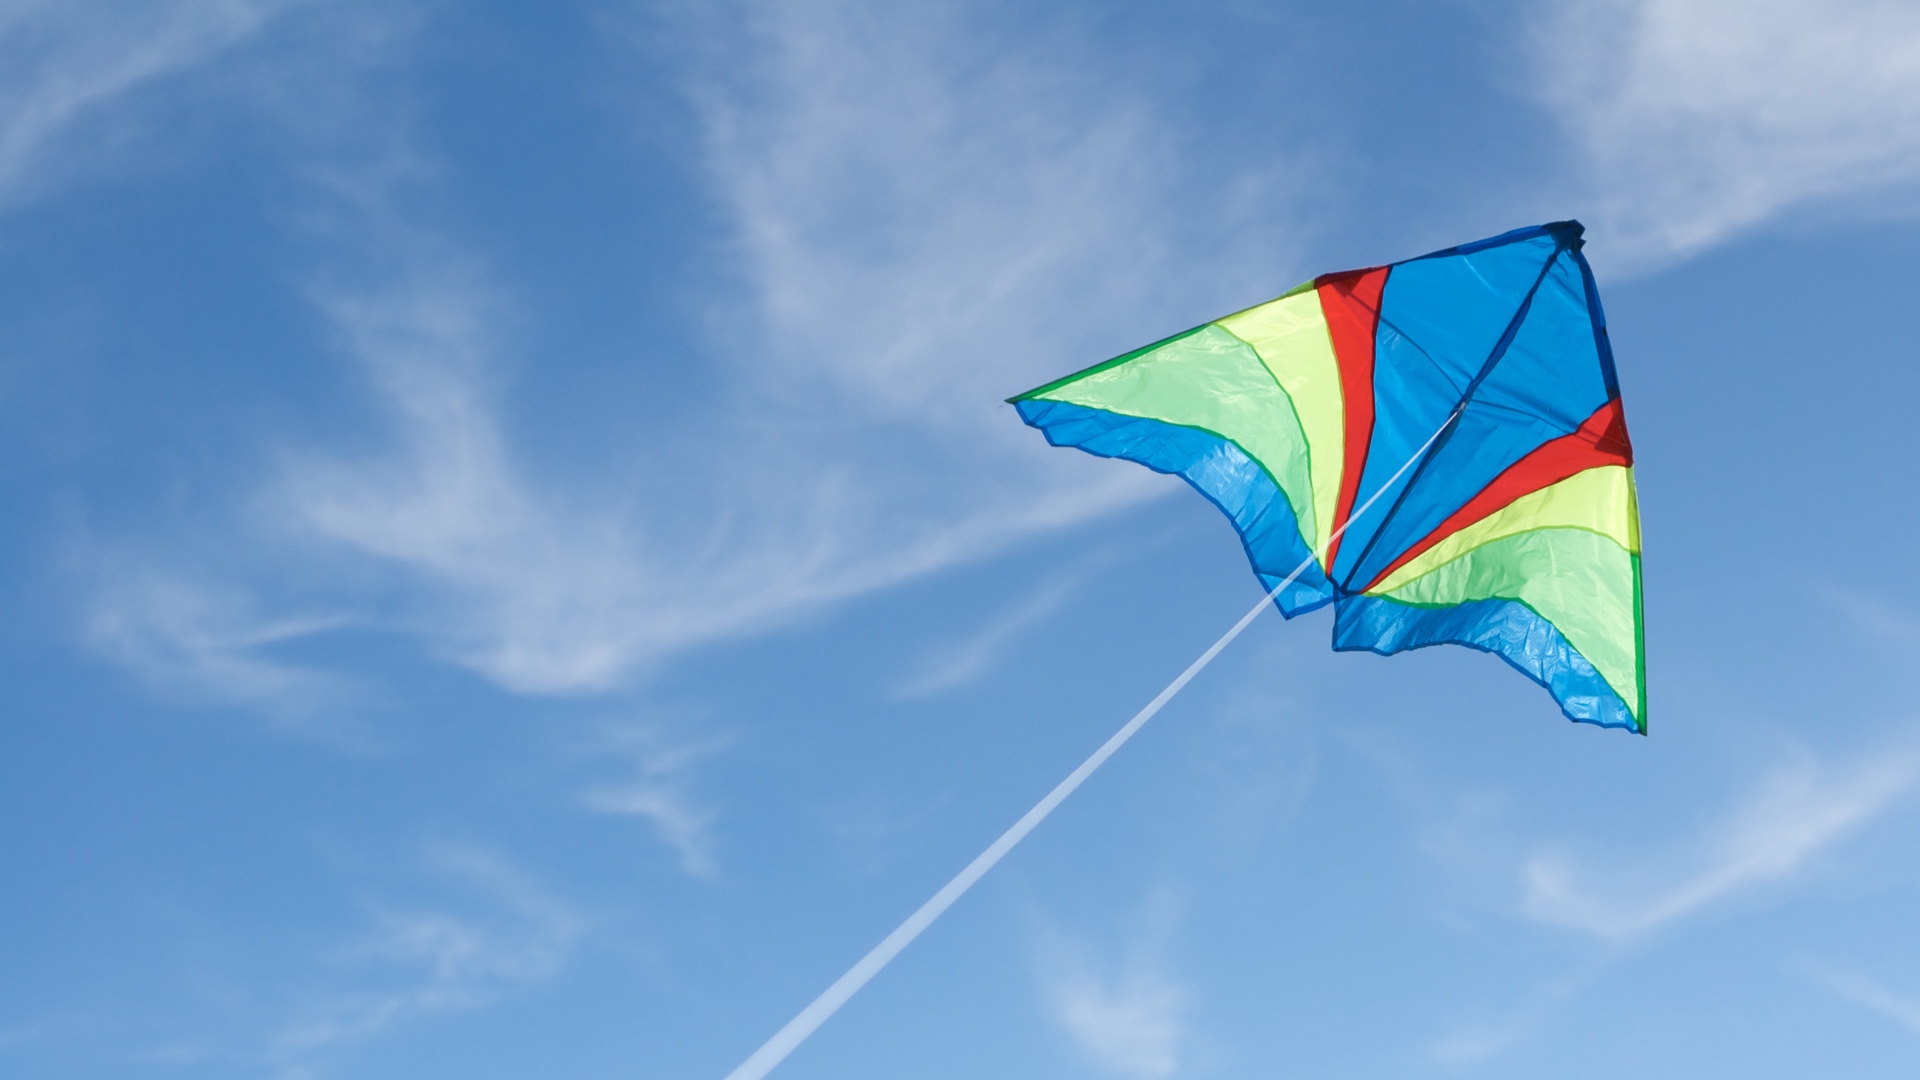 Wallpaper Kite, Sky, Flight - Kites Always Rise With Adverse Winds , HD Wallpaper & Backgrounds